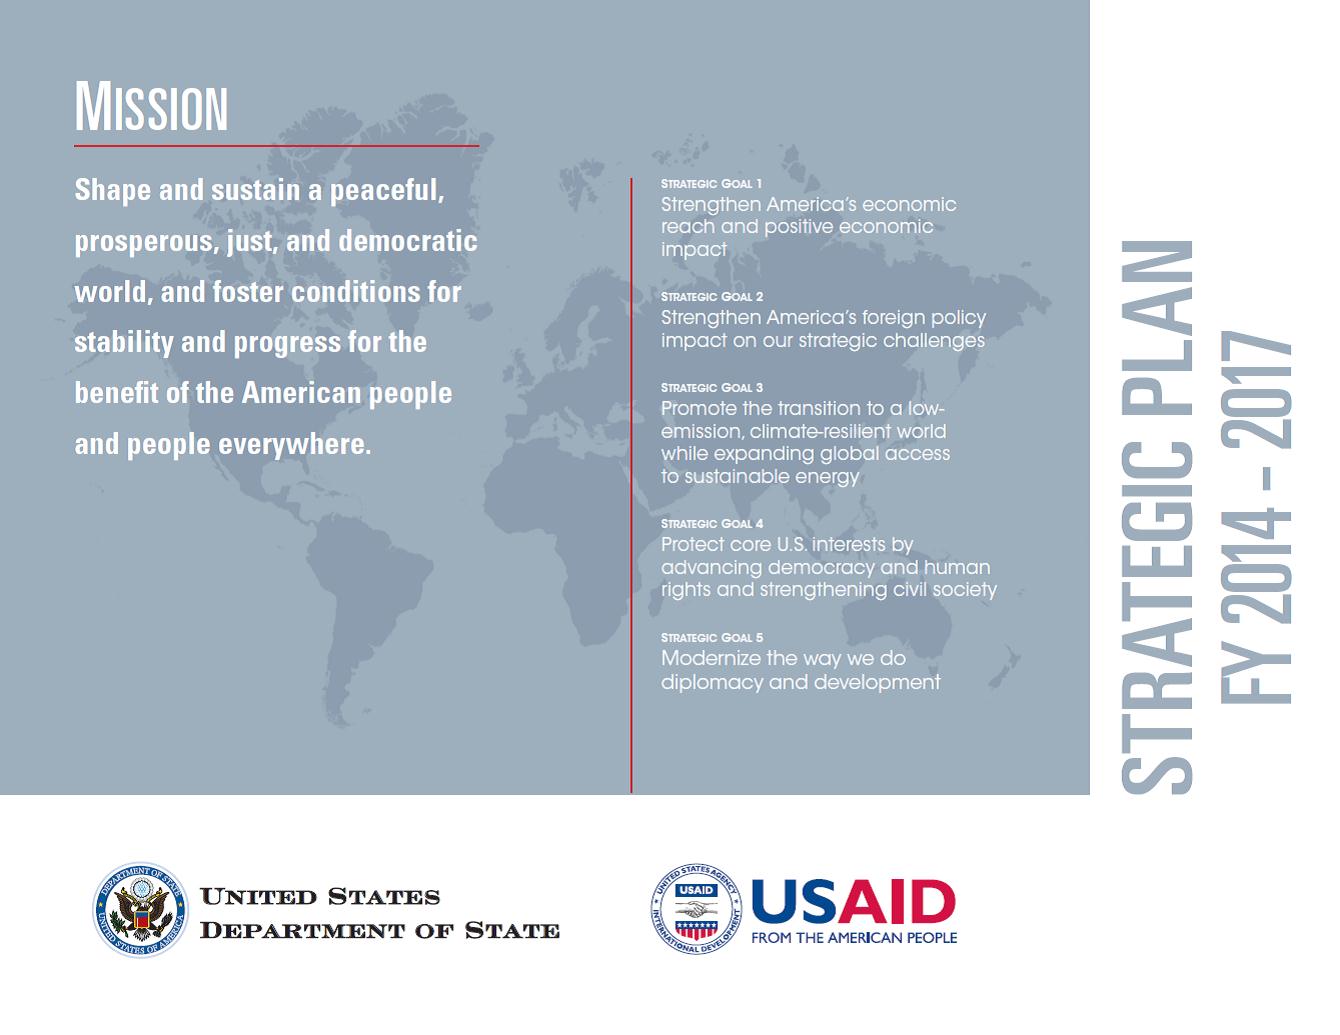 USAID and Department of State Strategic Plan FY 2014-2017